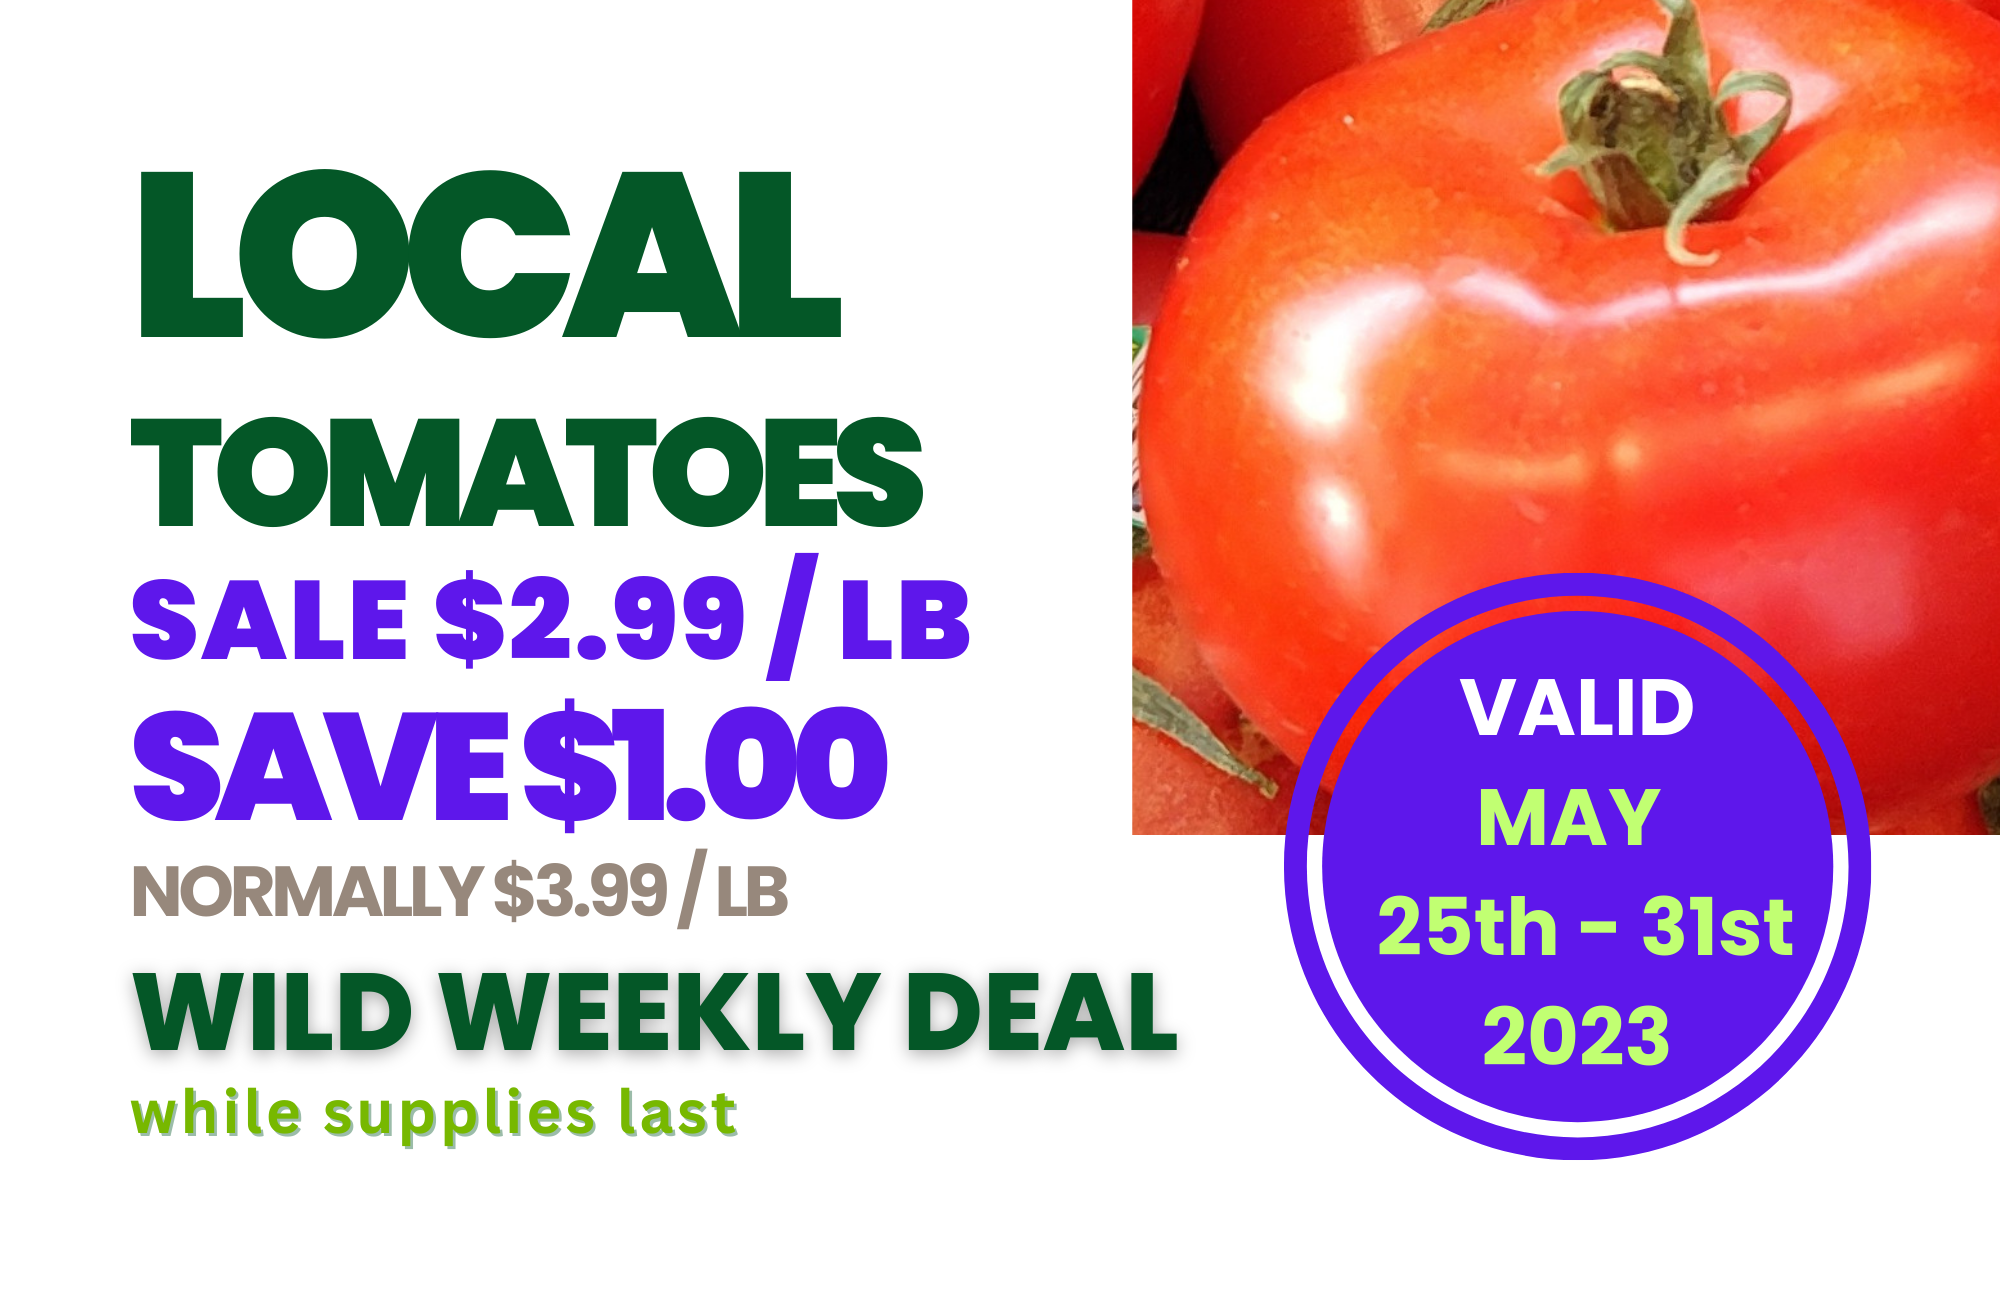 2023-0525-0531 Wild Weekend Deals Local Tomatoes.png